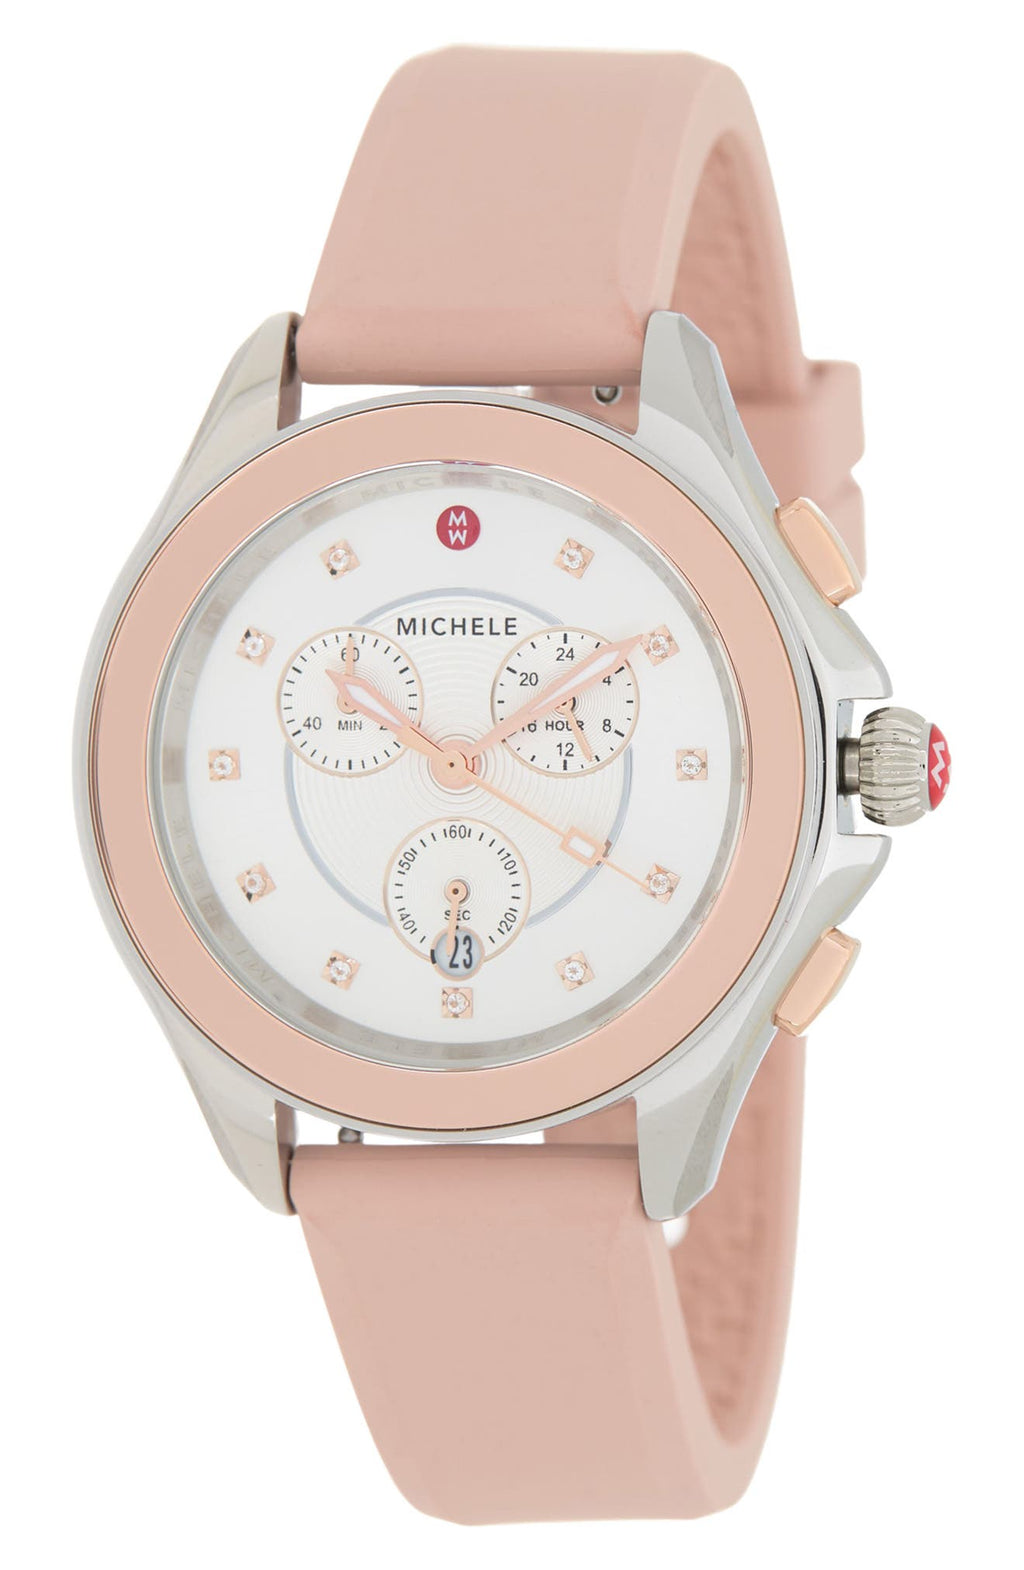 MICHELE Cape Chronograph Desert Rose Silicone Watch, 38mm, Main, color, ROSE